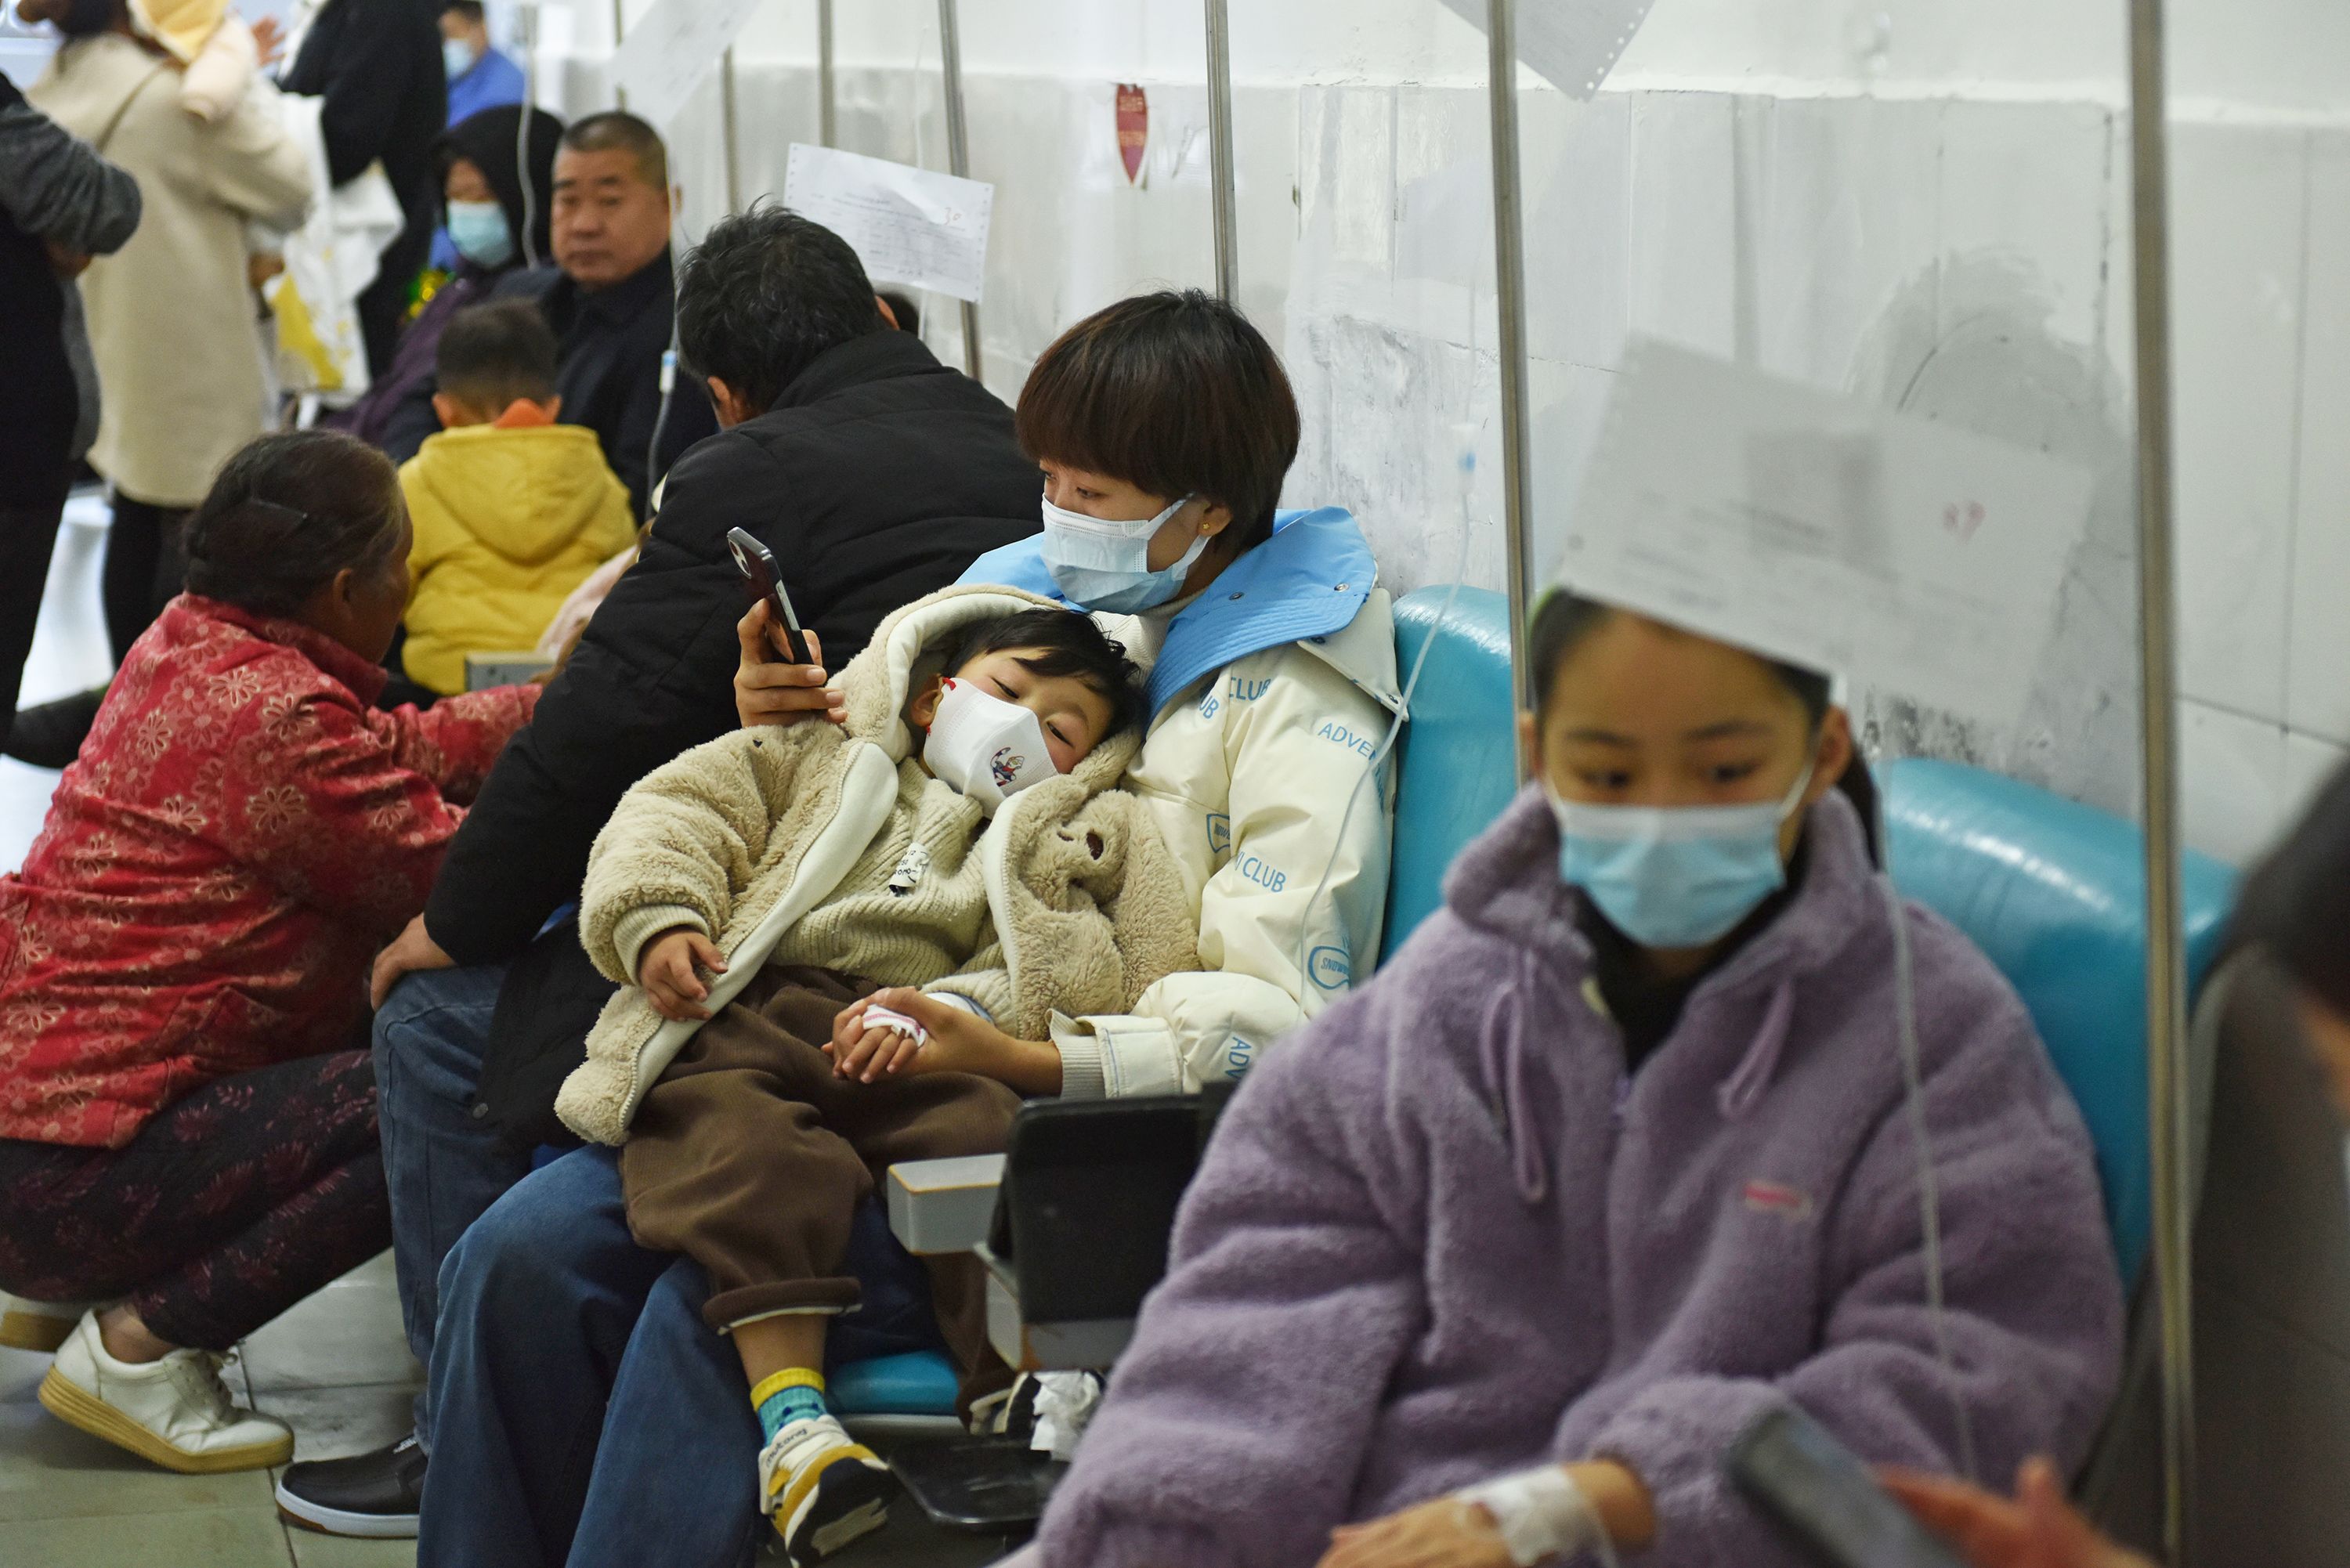 How concerning is the spike in respiratory illnesses in China? A doctor